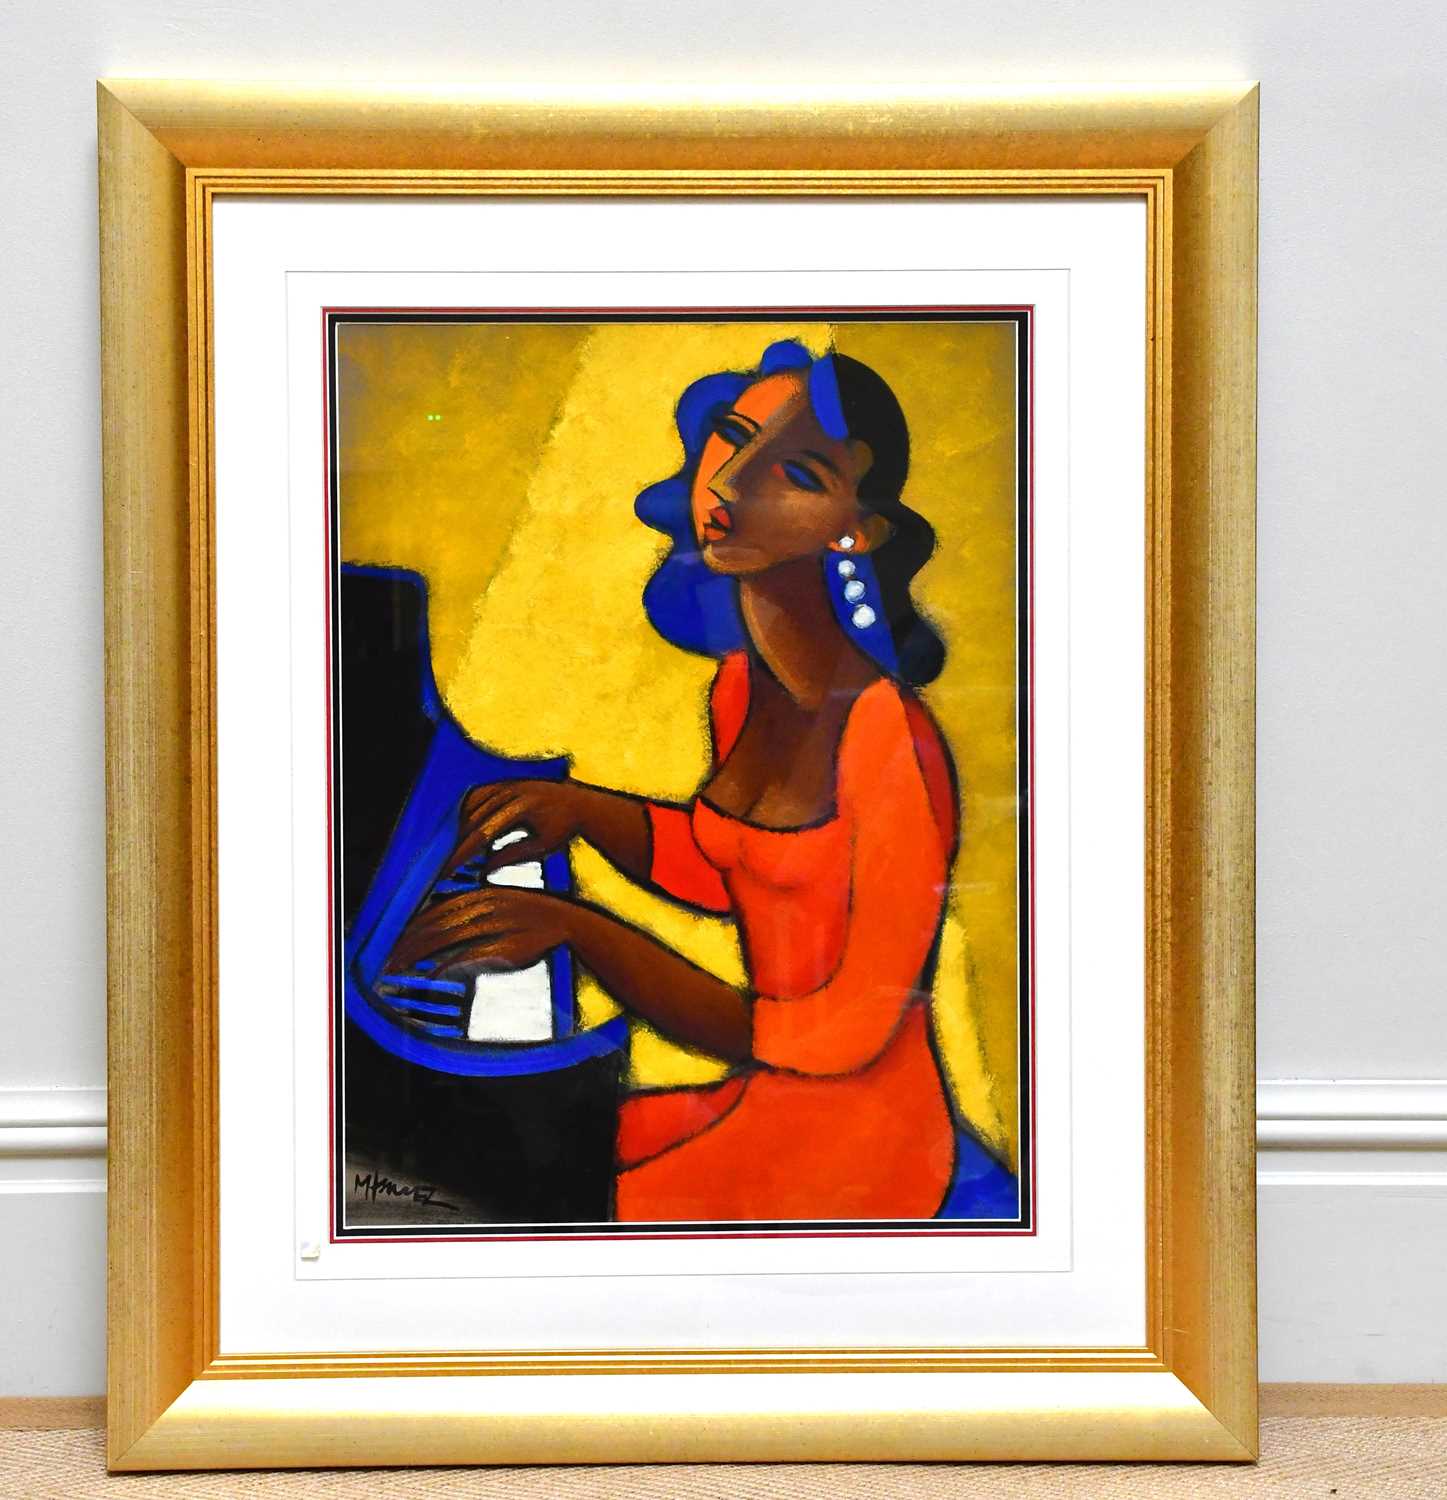 MARSHA HAMMEL; oil on gesso, 'In The Groove - 1937 Mary Lou Williams', signed, 60 x 46cm, framed and